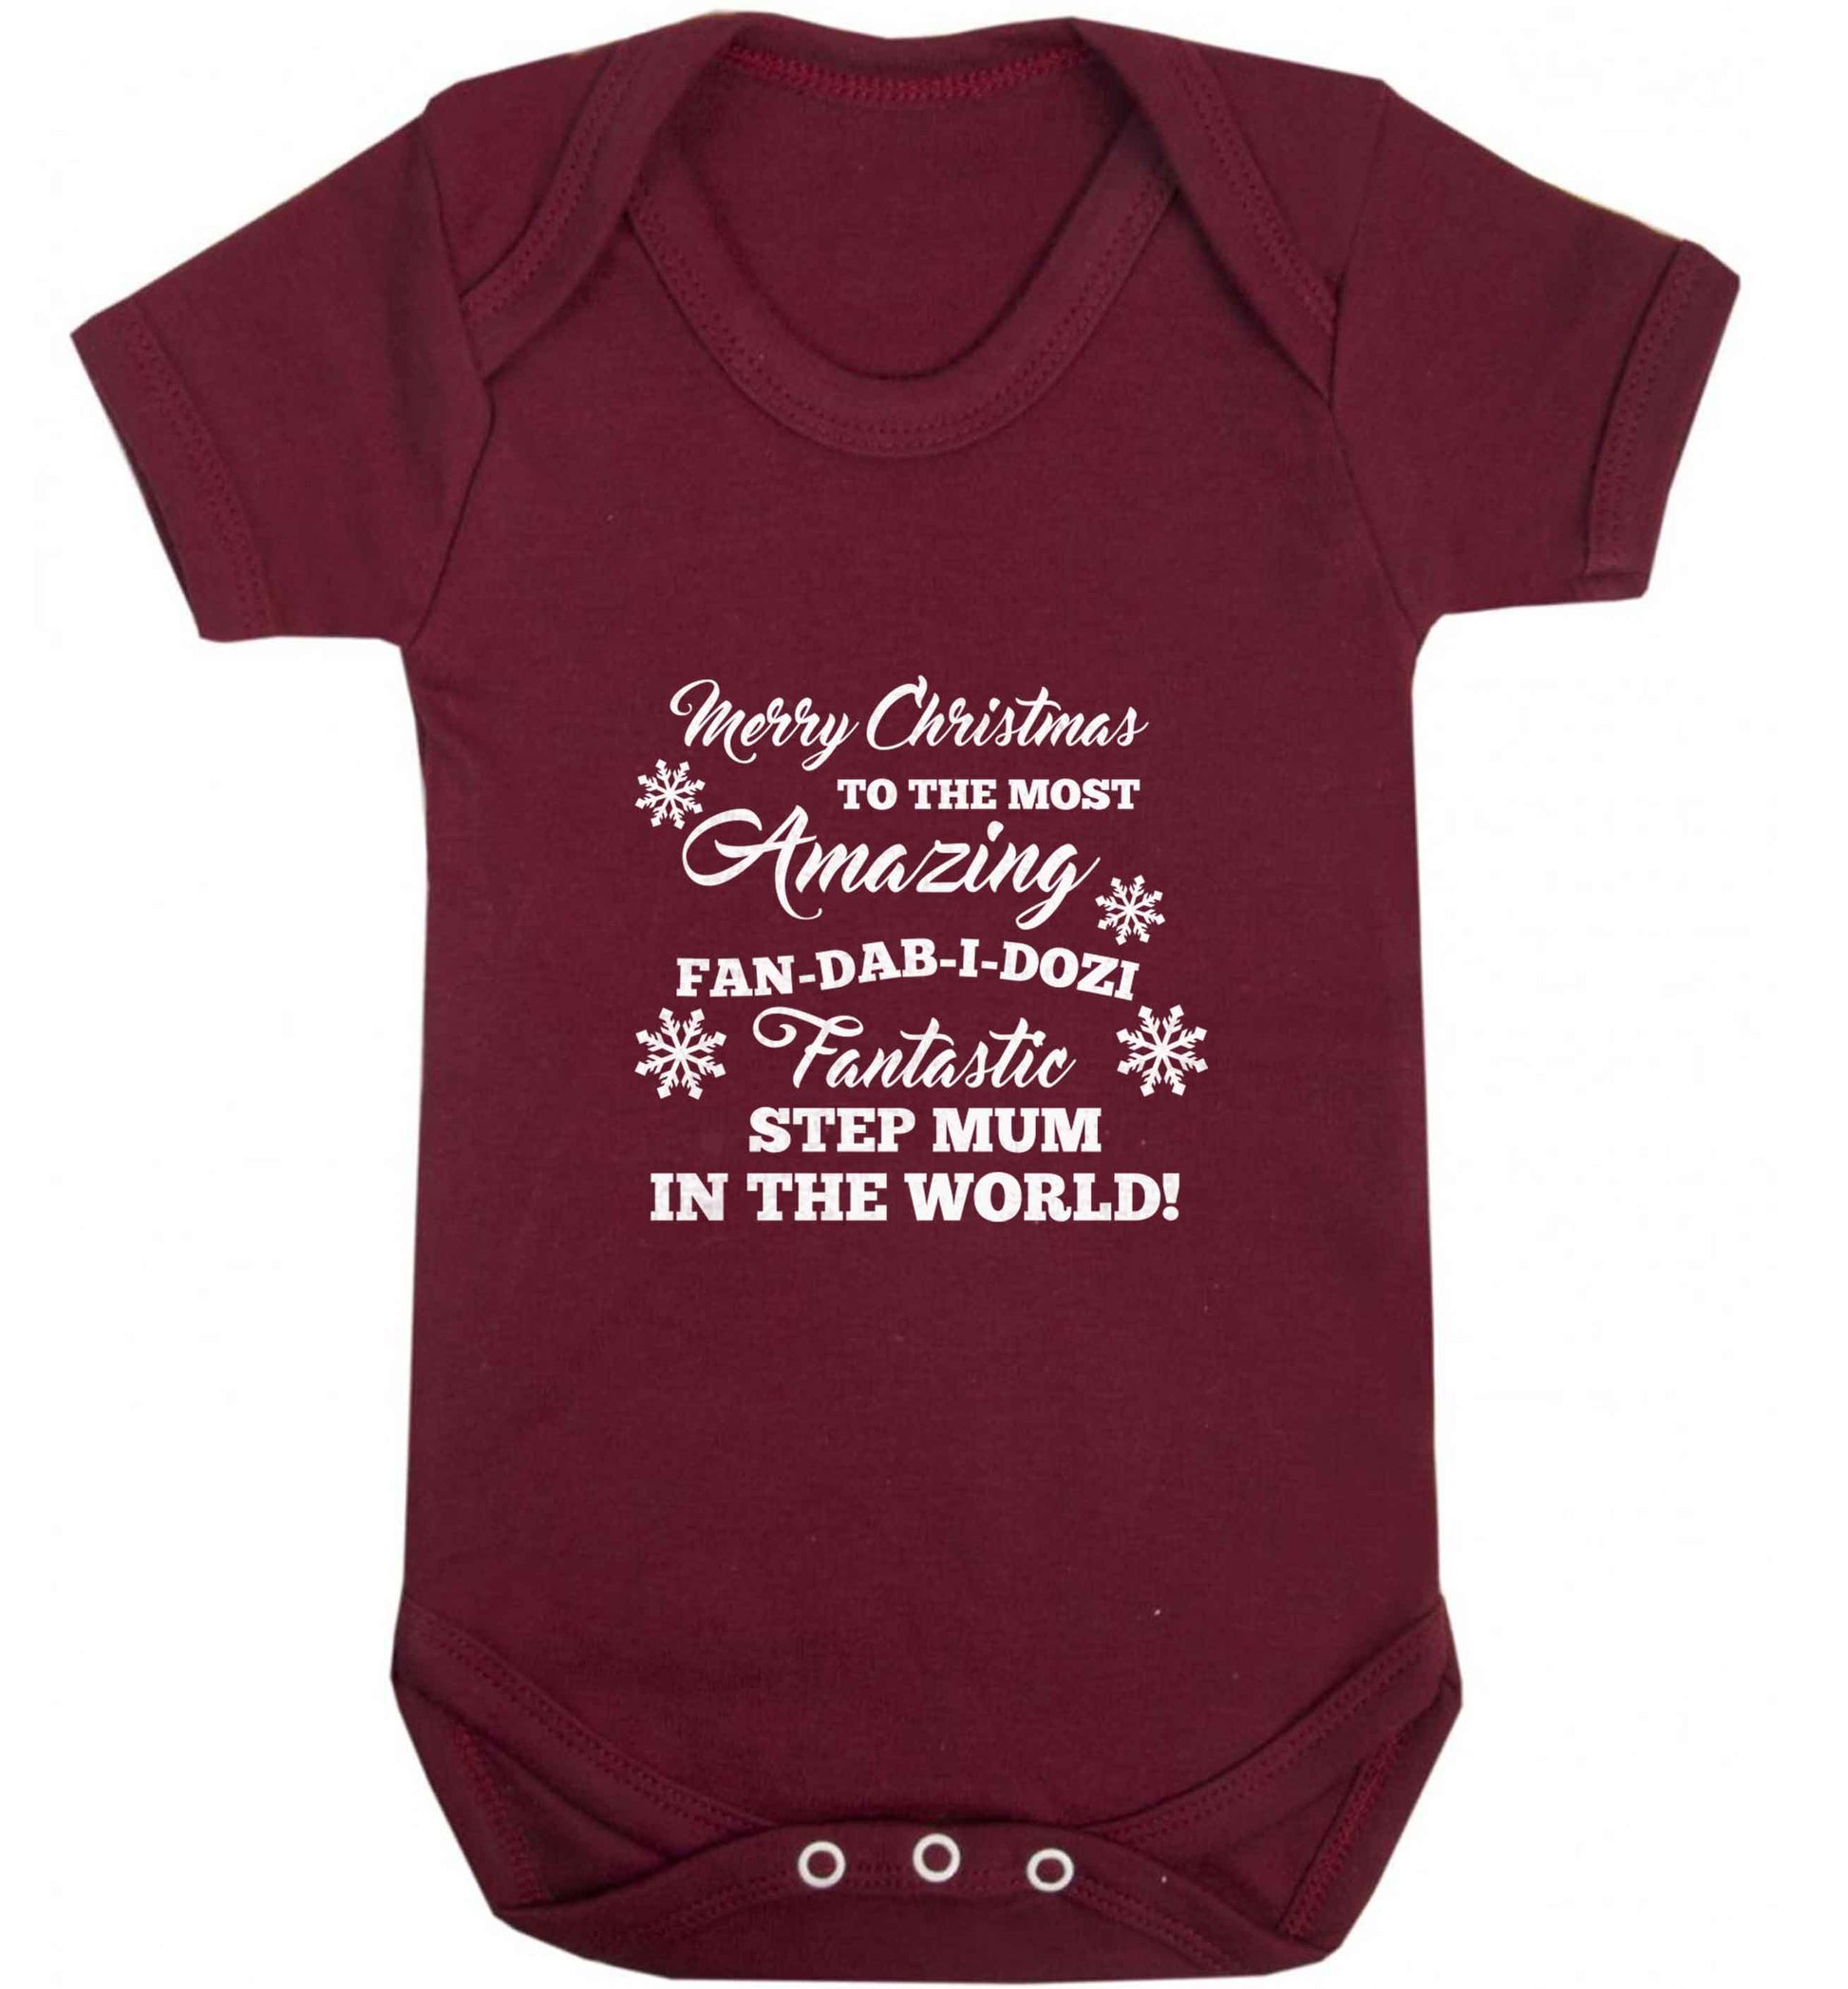 Merry Christmas to the most amazing fan-dab-i-dozi fantasic Step Mum in the world baby vest maroon 18-24 months